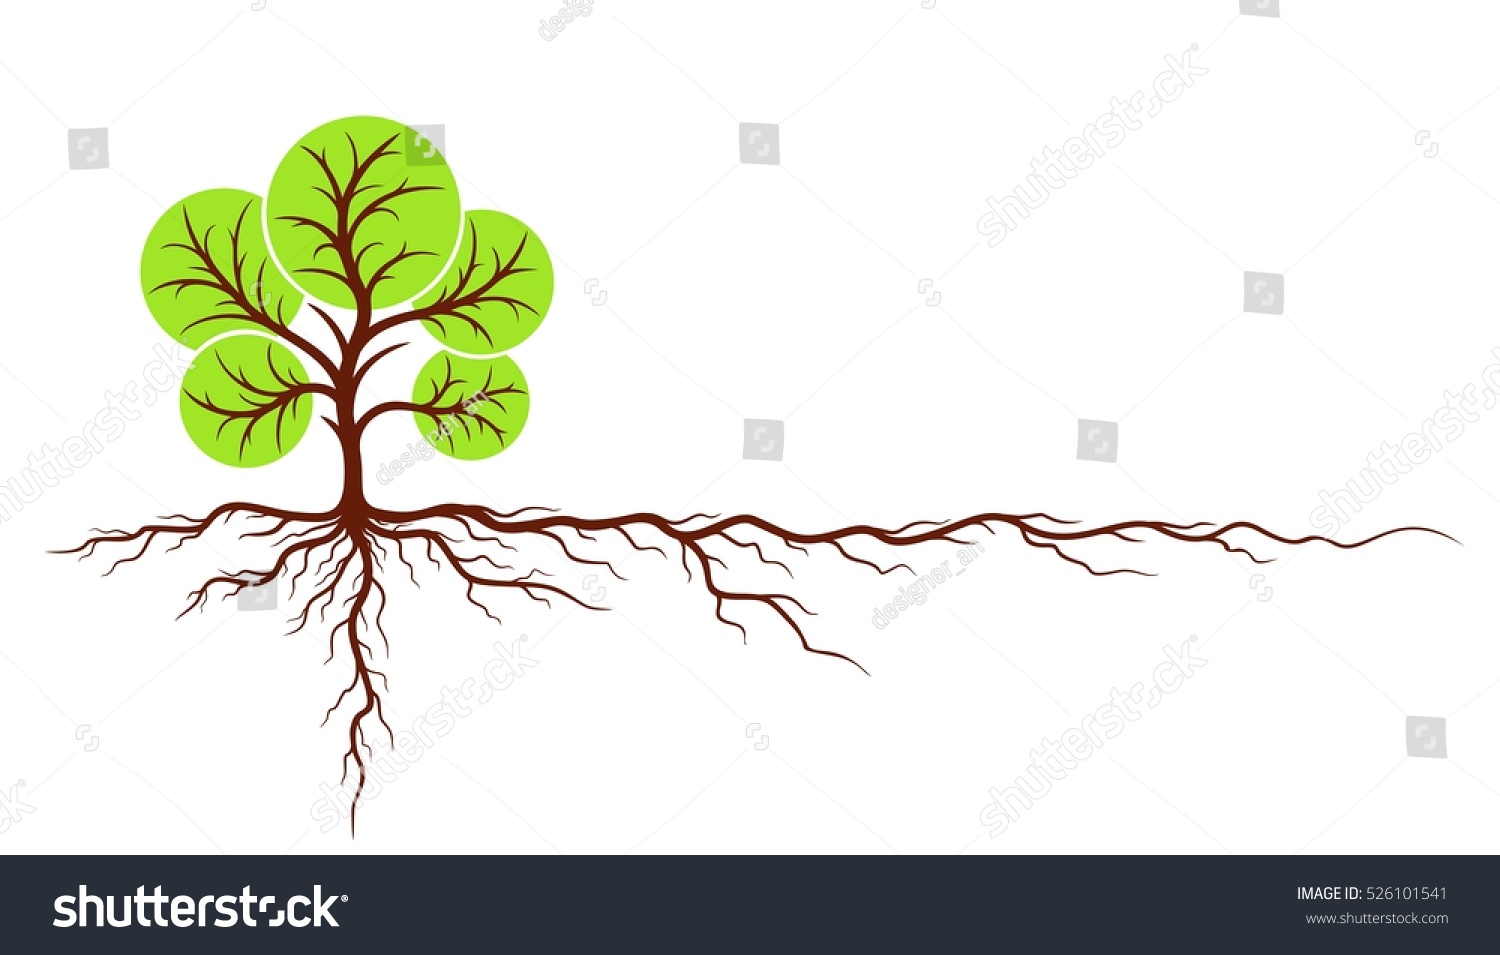 Edit Vectors Free Online - Tree with roots. | Shutterstock Editor